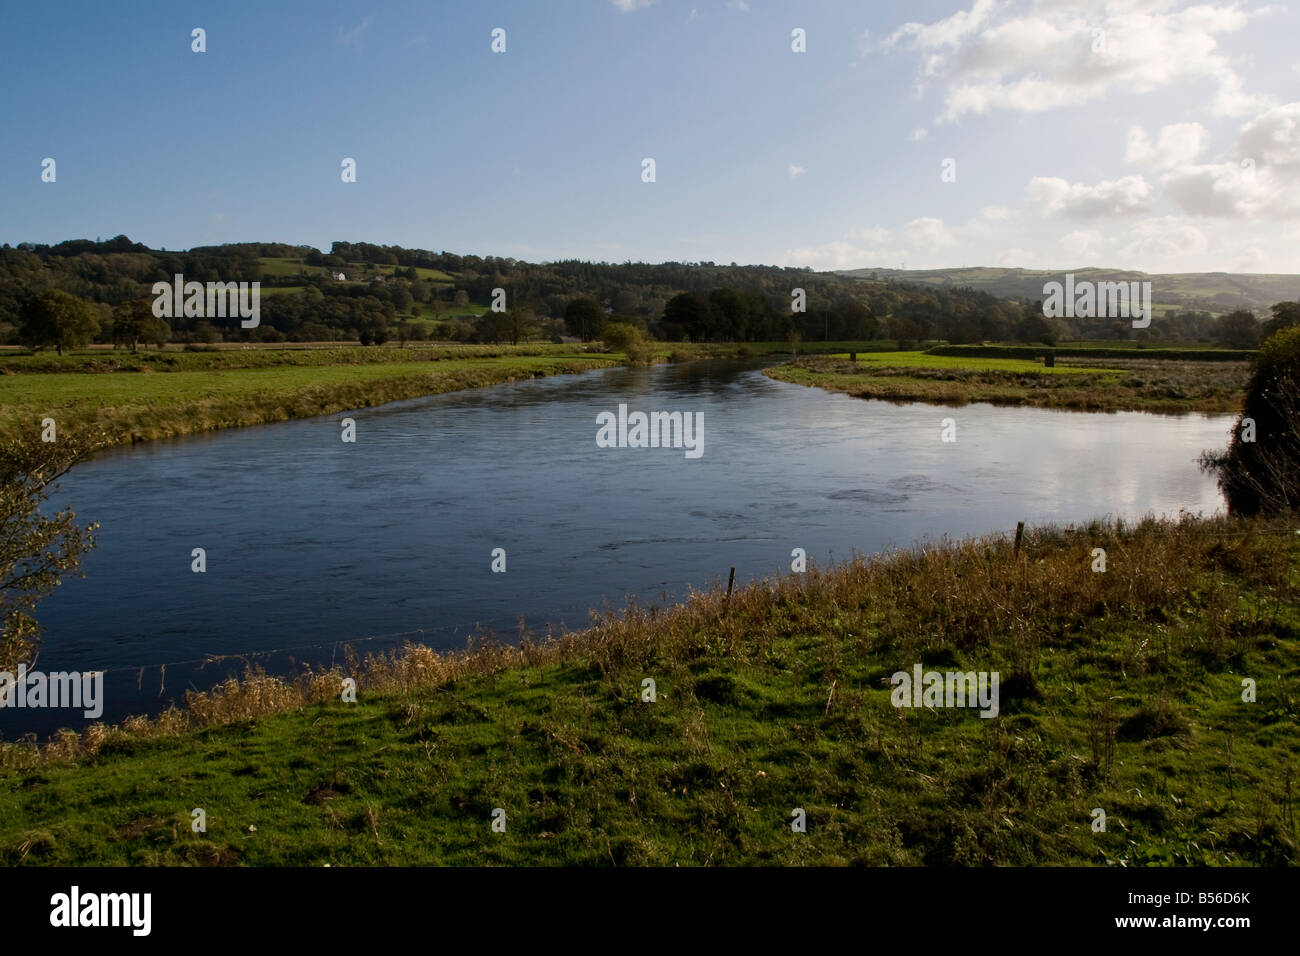 Confluence of Rivers Crafnant and Conwy in the Conwy Valley near Trefriw, Wales Stock Photo